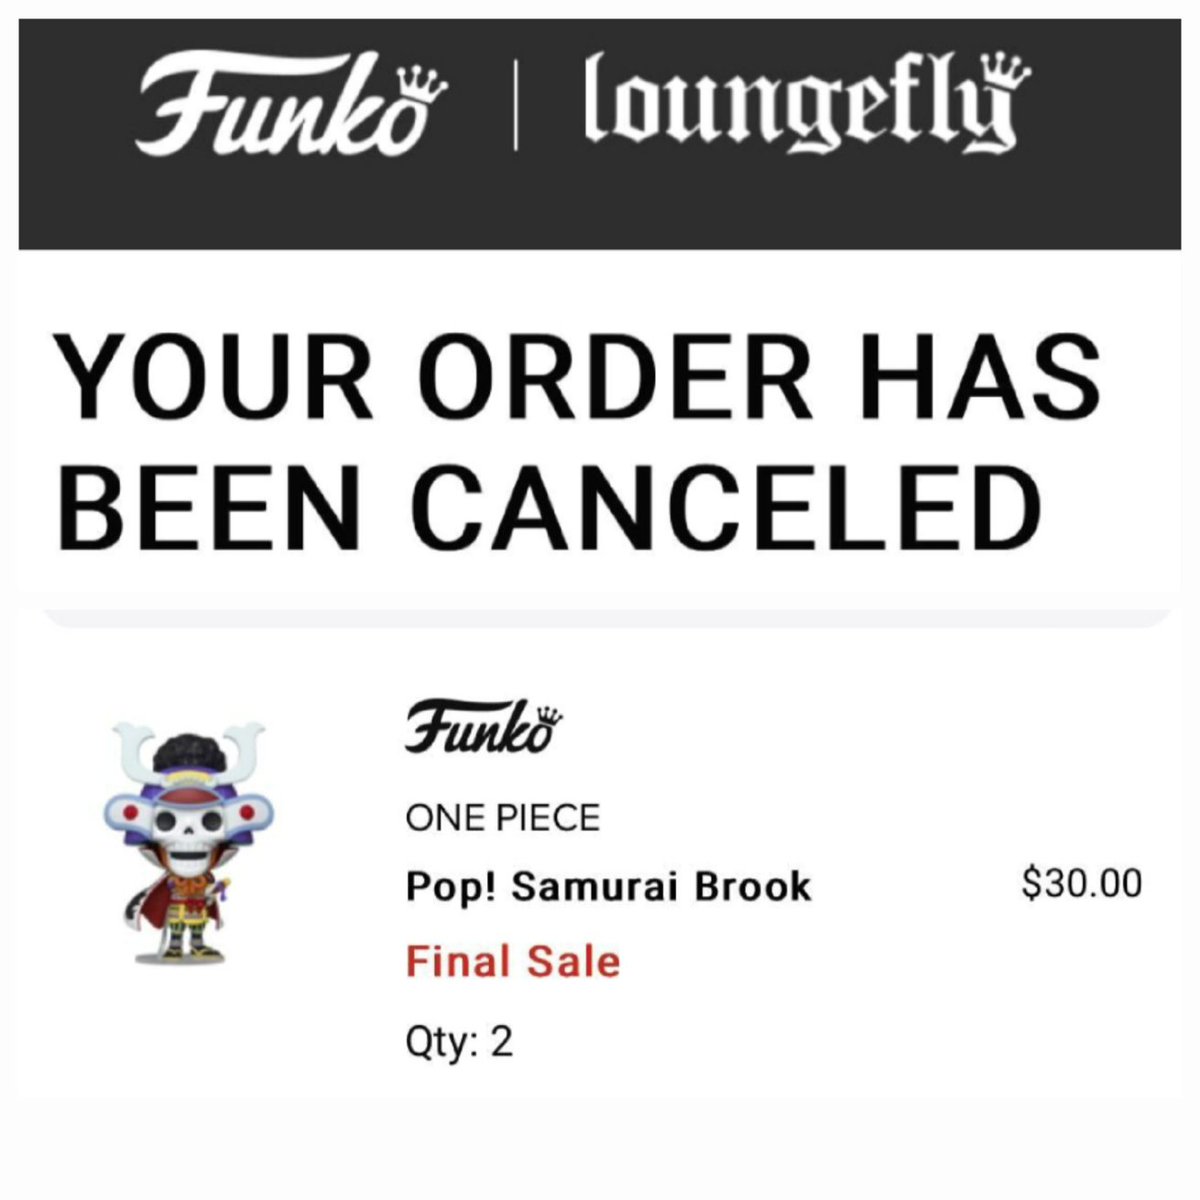 Unfortunately, it looks like some Samurai Brook orders are being canceled by Funko! Check those emails 💀 Thanks for sharing @piercingsbylutovsky - #funko #funkopop #funkopopcollection #funkoaddict #funkopops #anime #manga #skittlerampage #onepiece #onepieceanime